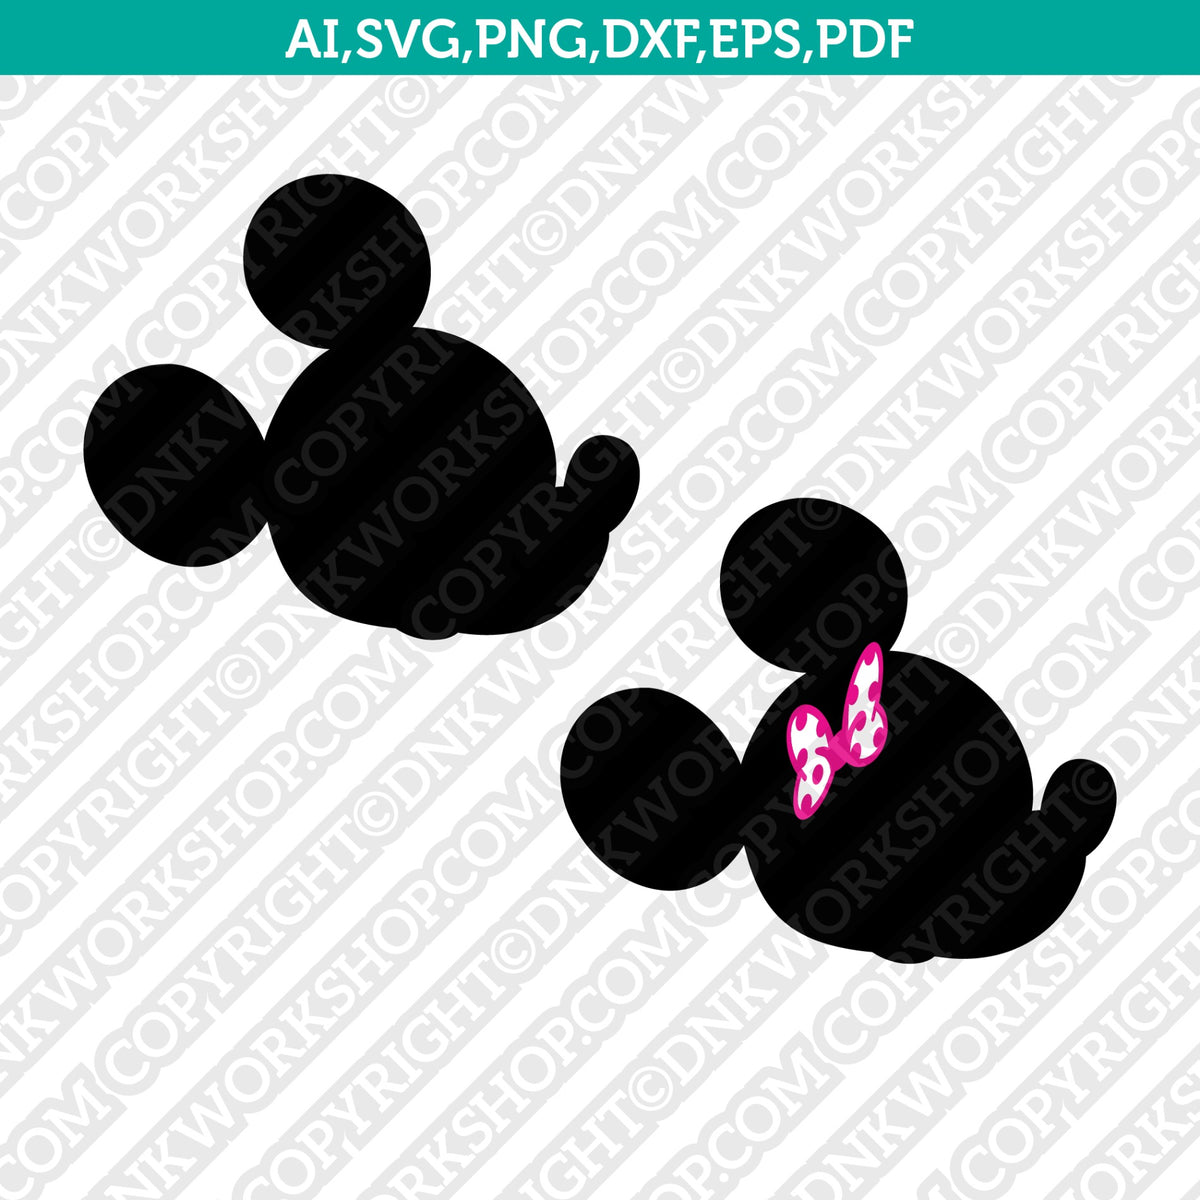 Mickey and Minnie Logo PNG Vector (EPS) Free Download